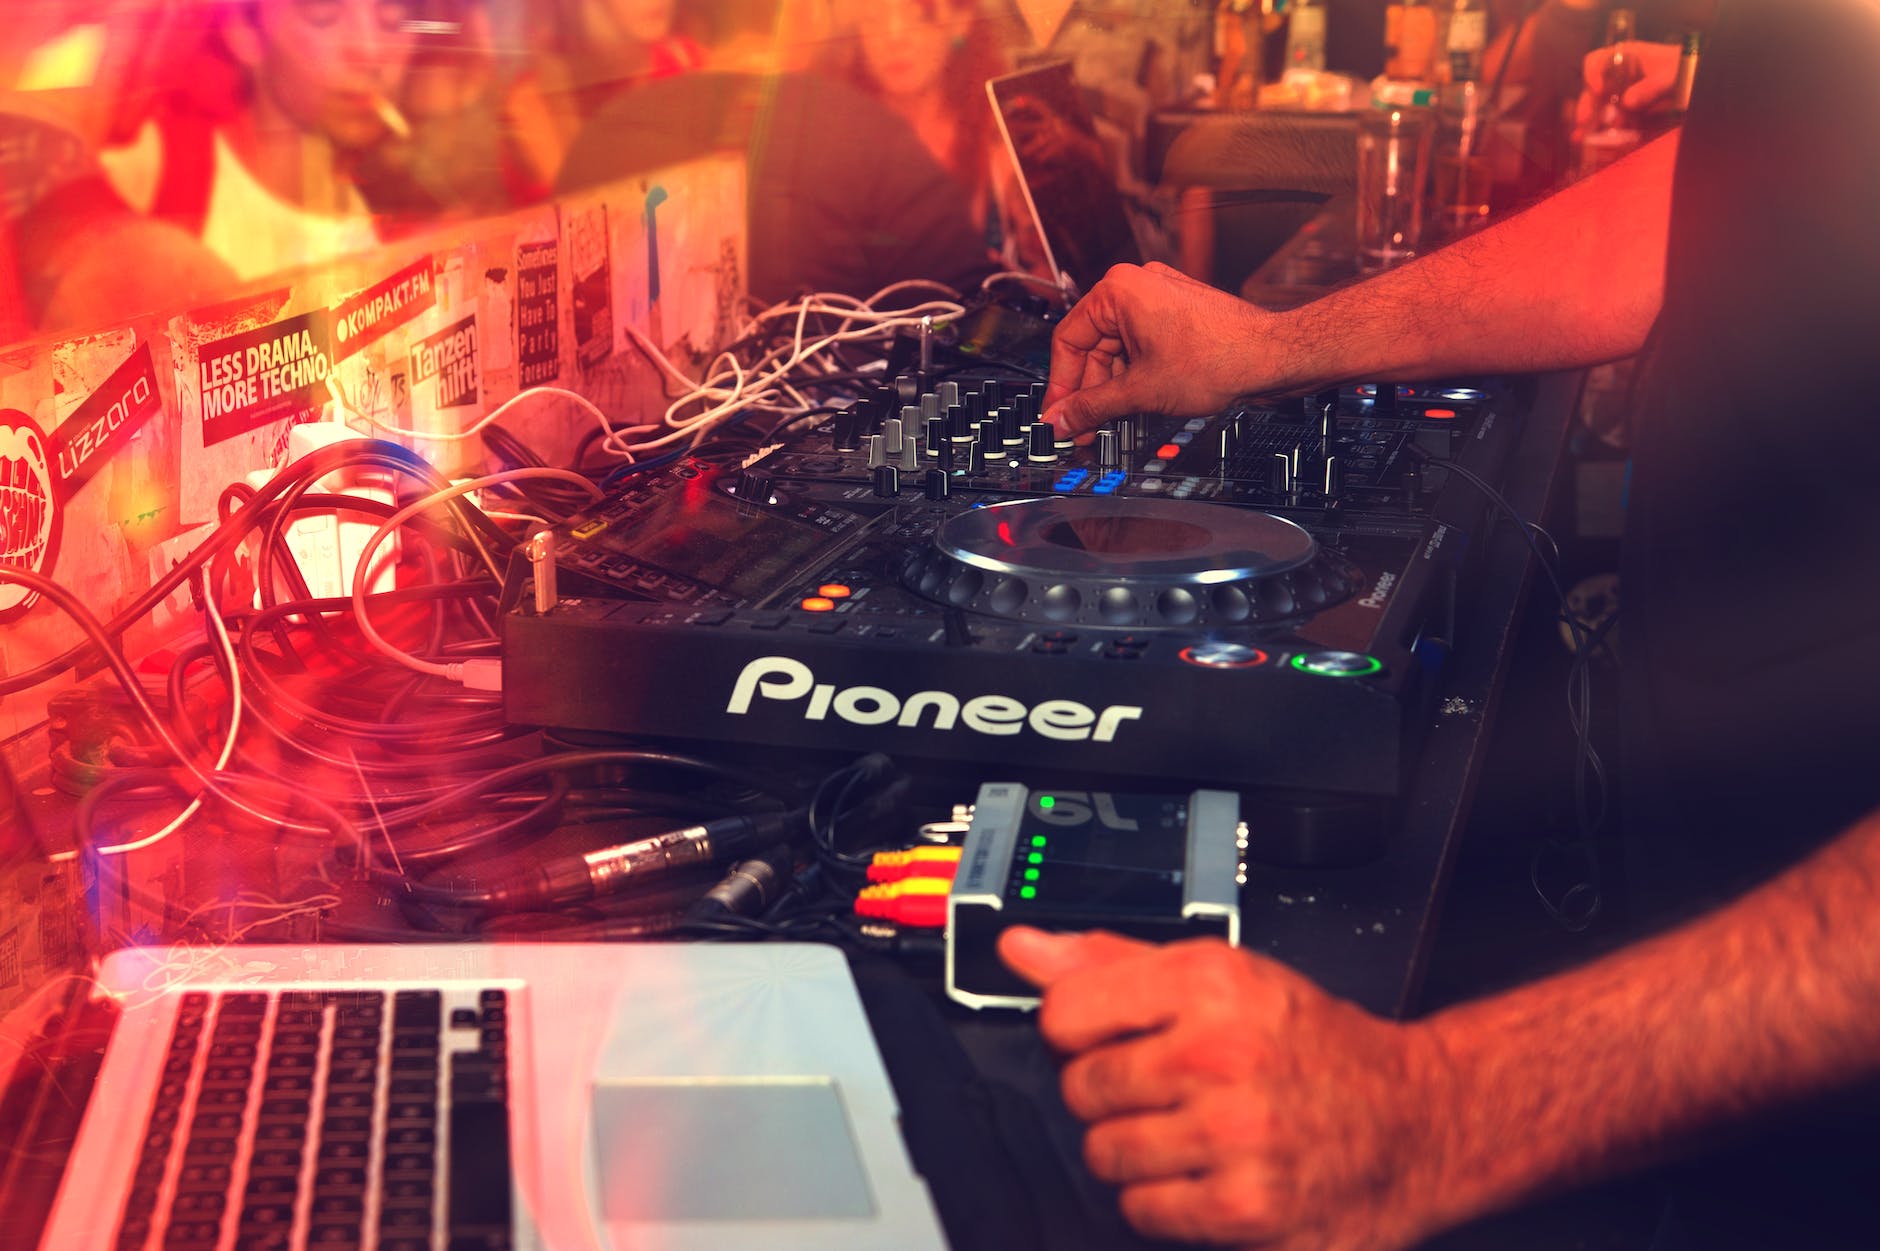 Hosting a Party With Live Music? Hereâ€™s How to Make Sure Everything Goes Smooth